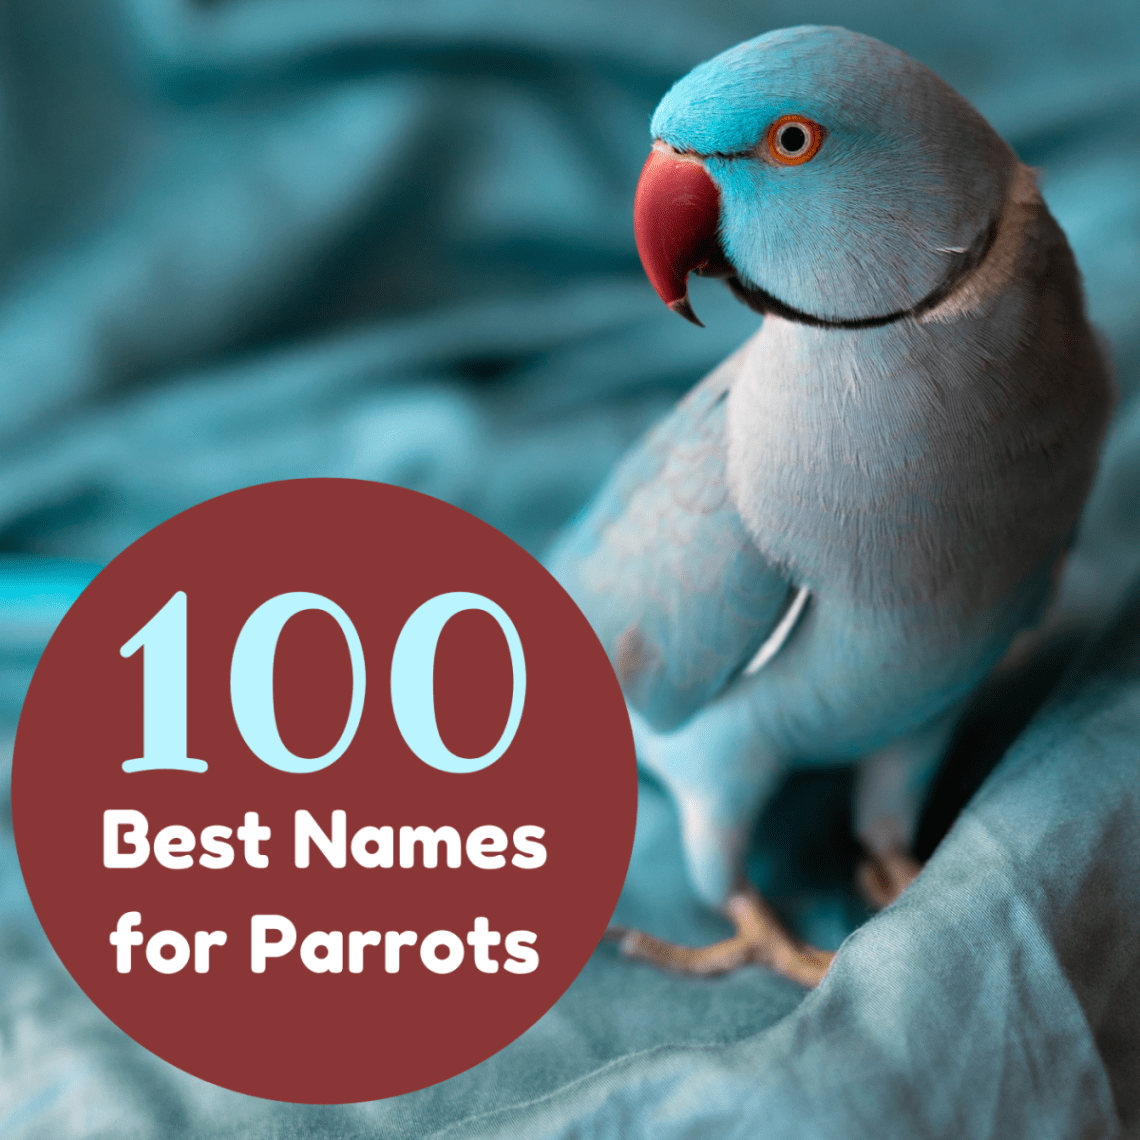 How to name a parrot?